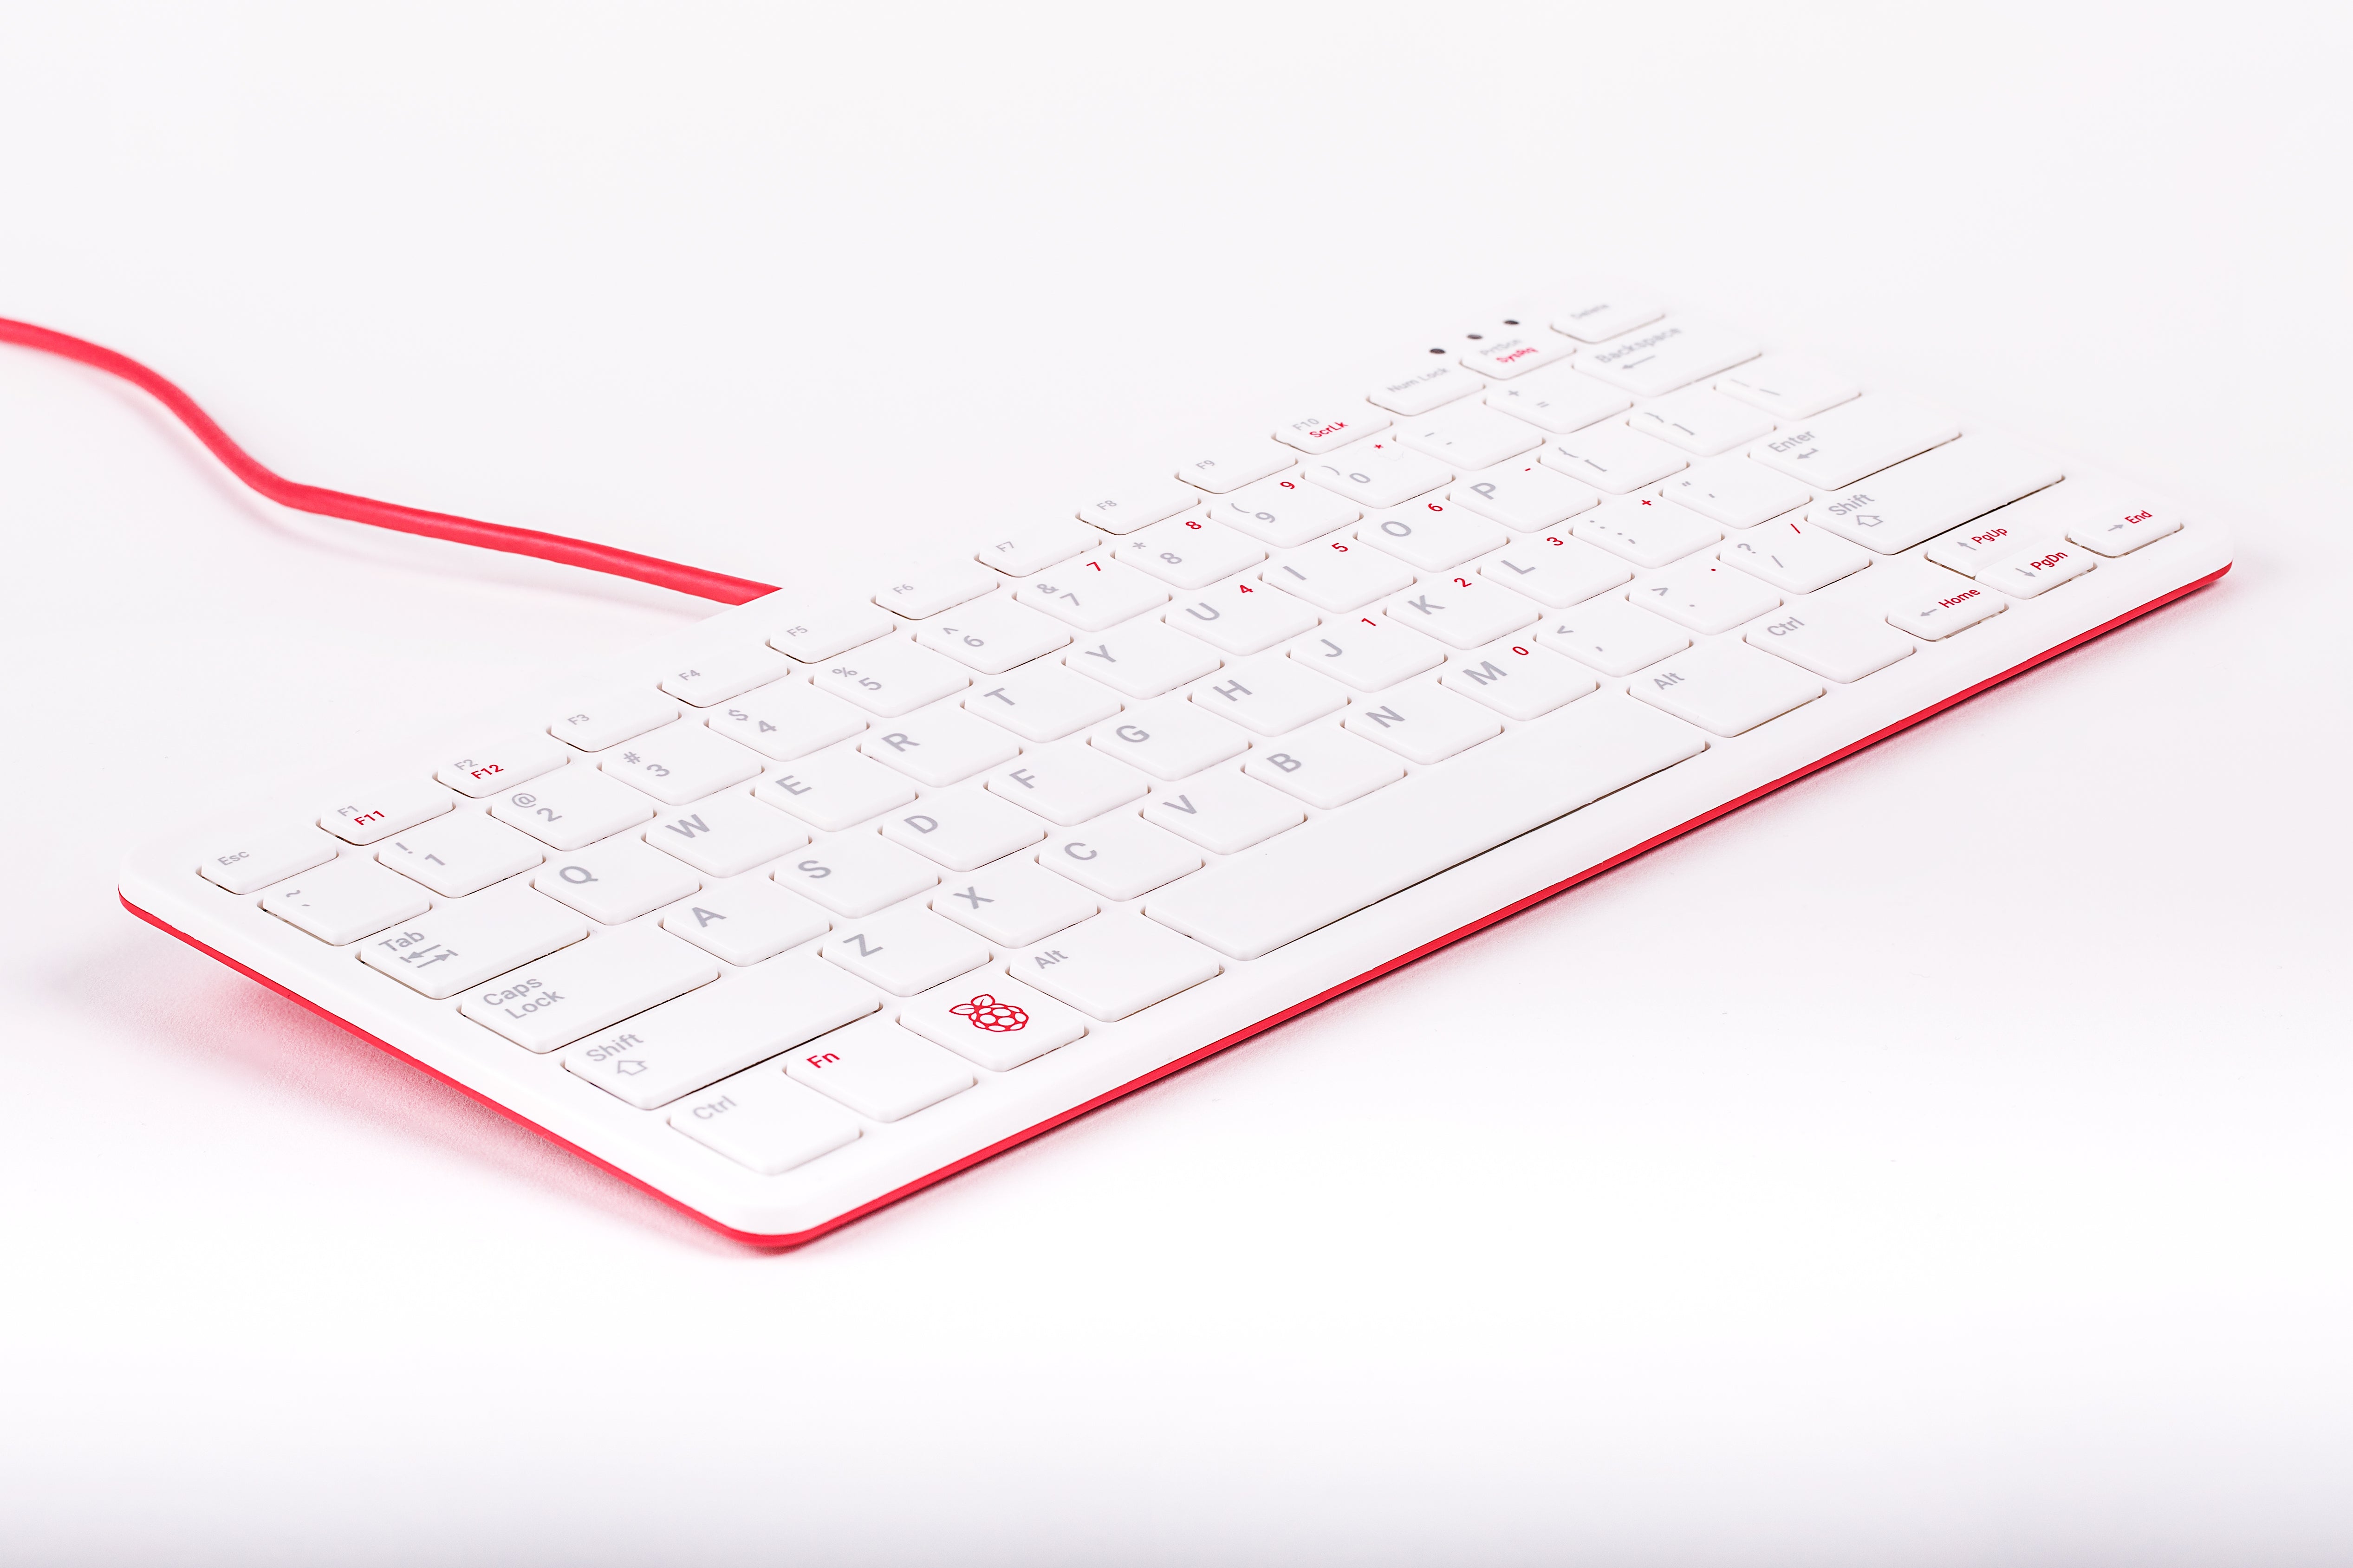 Official Raspberry Pi Keyboard and Hub- Red & White